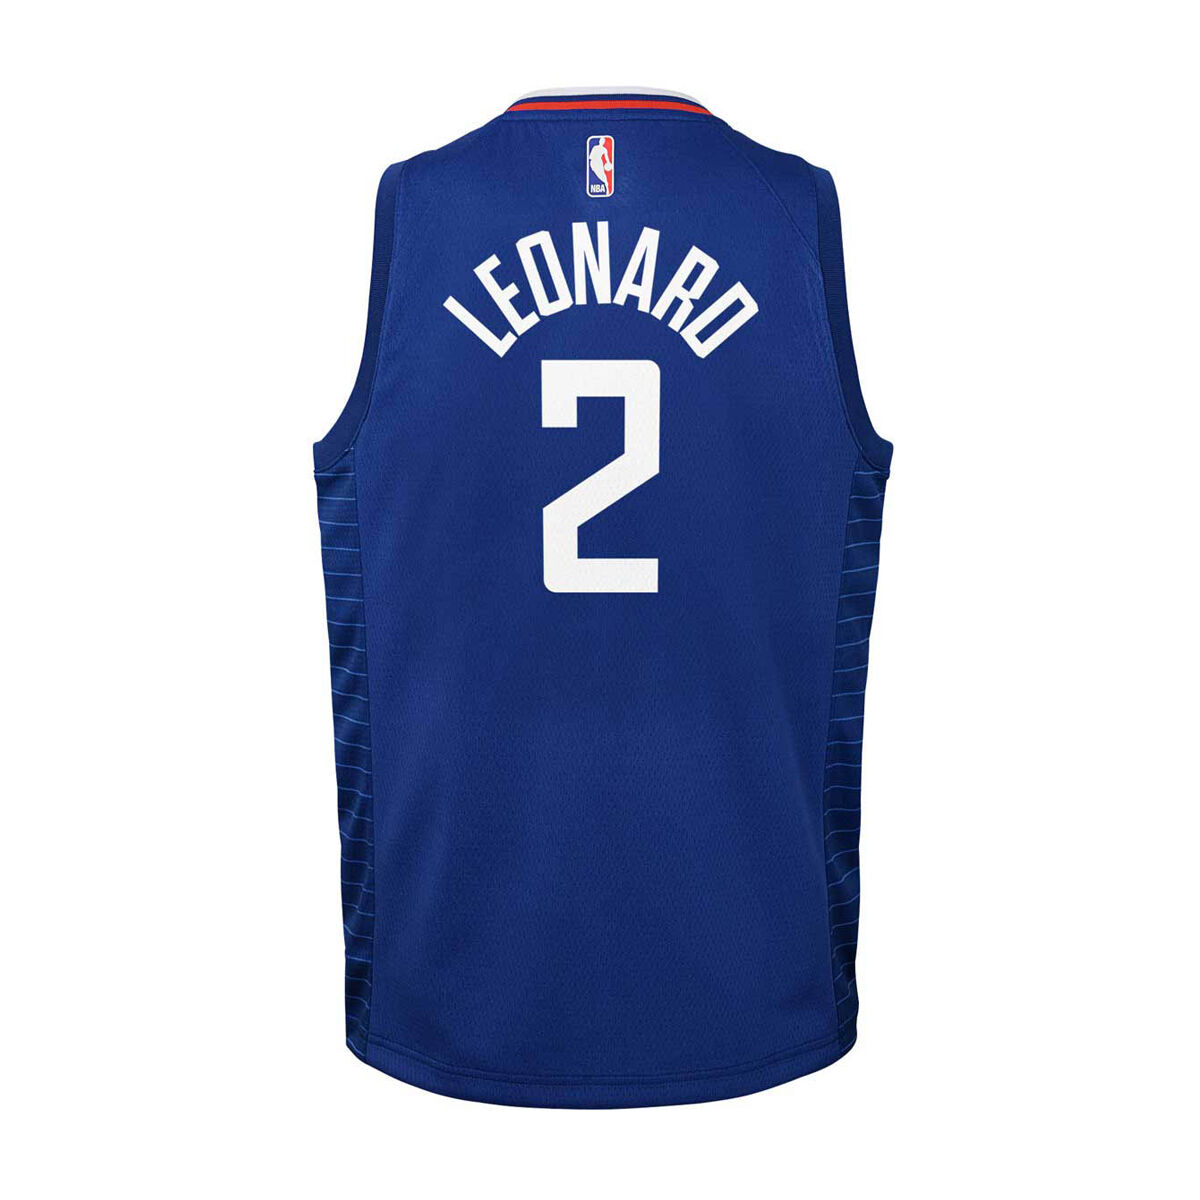 clippers nike jersey